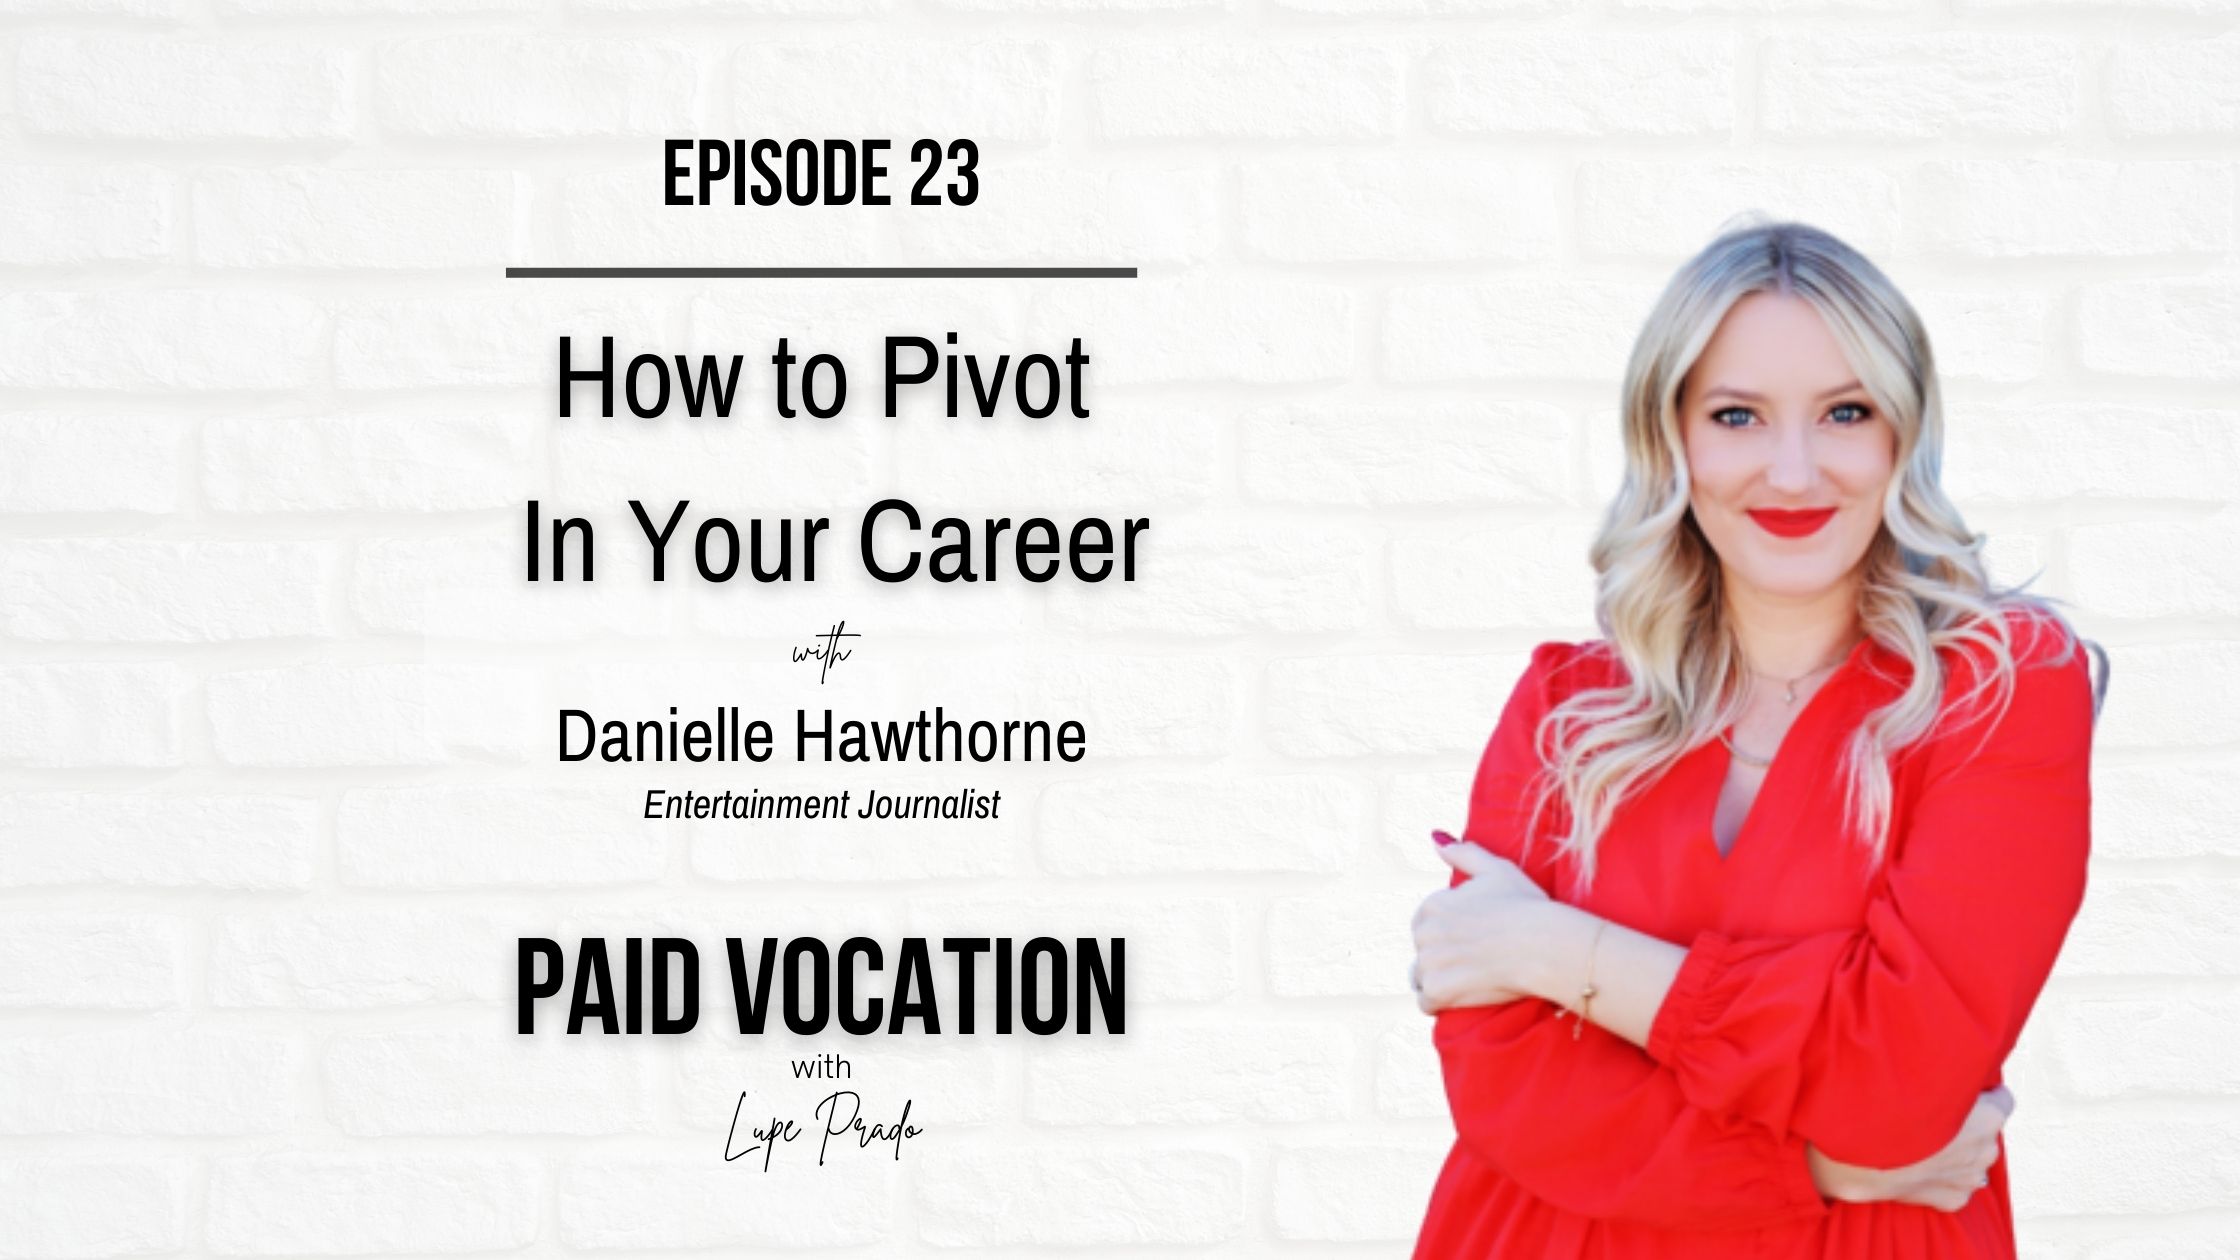 How to Pivot In Your Career | Danielle Hawthorne